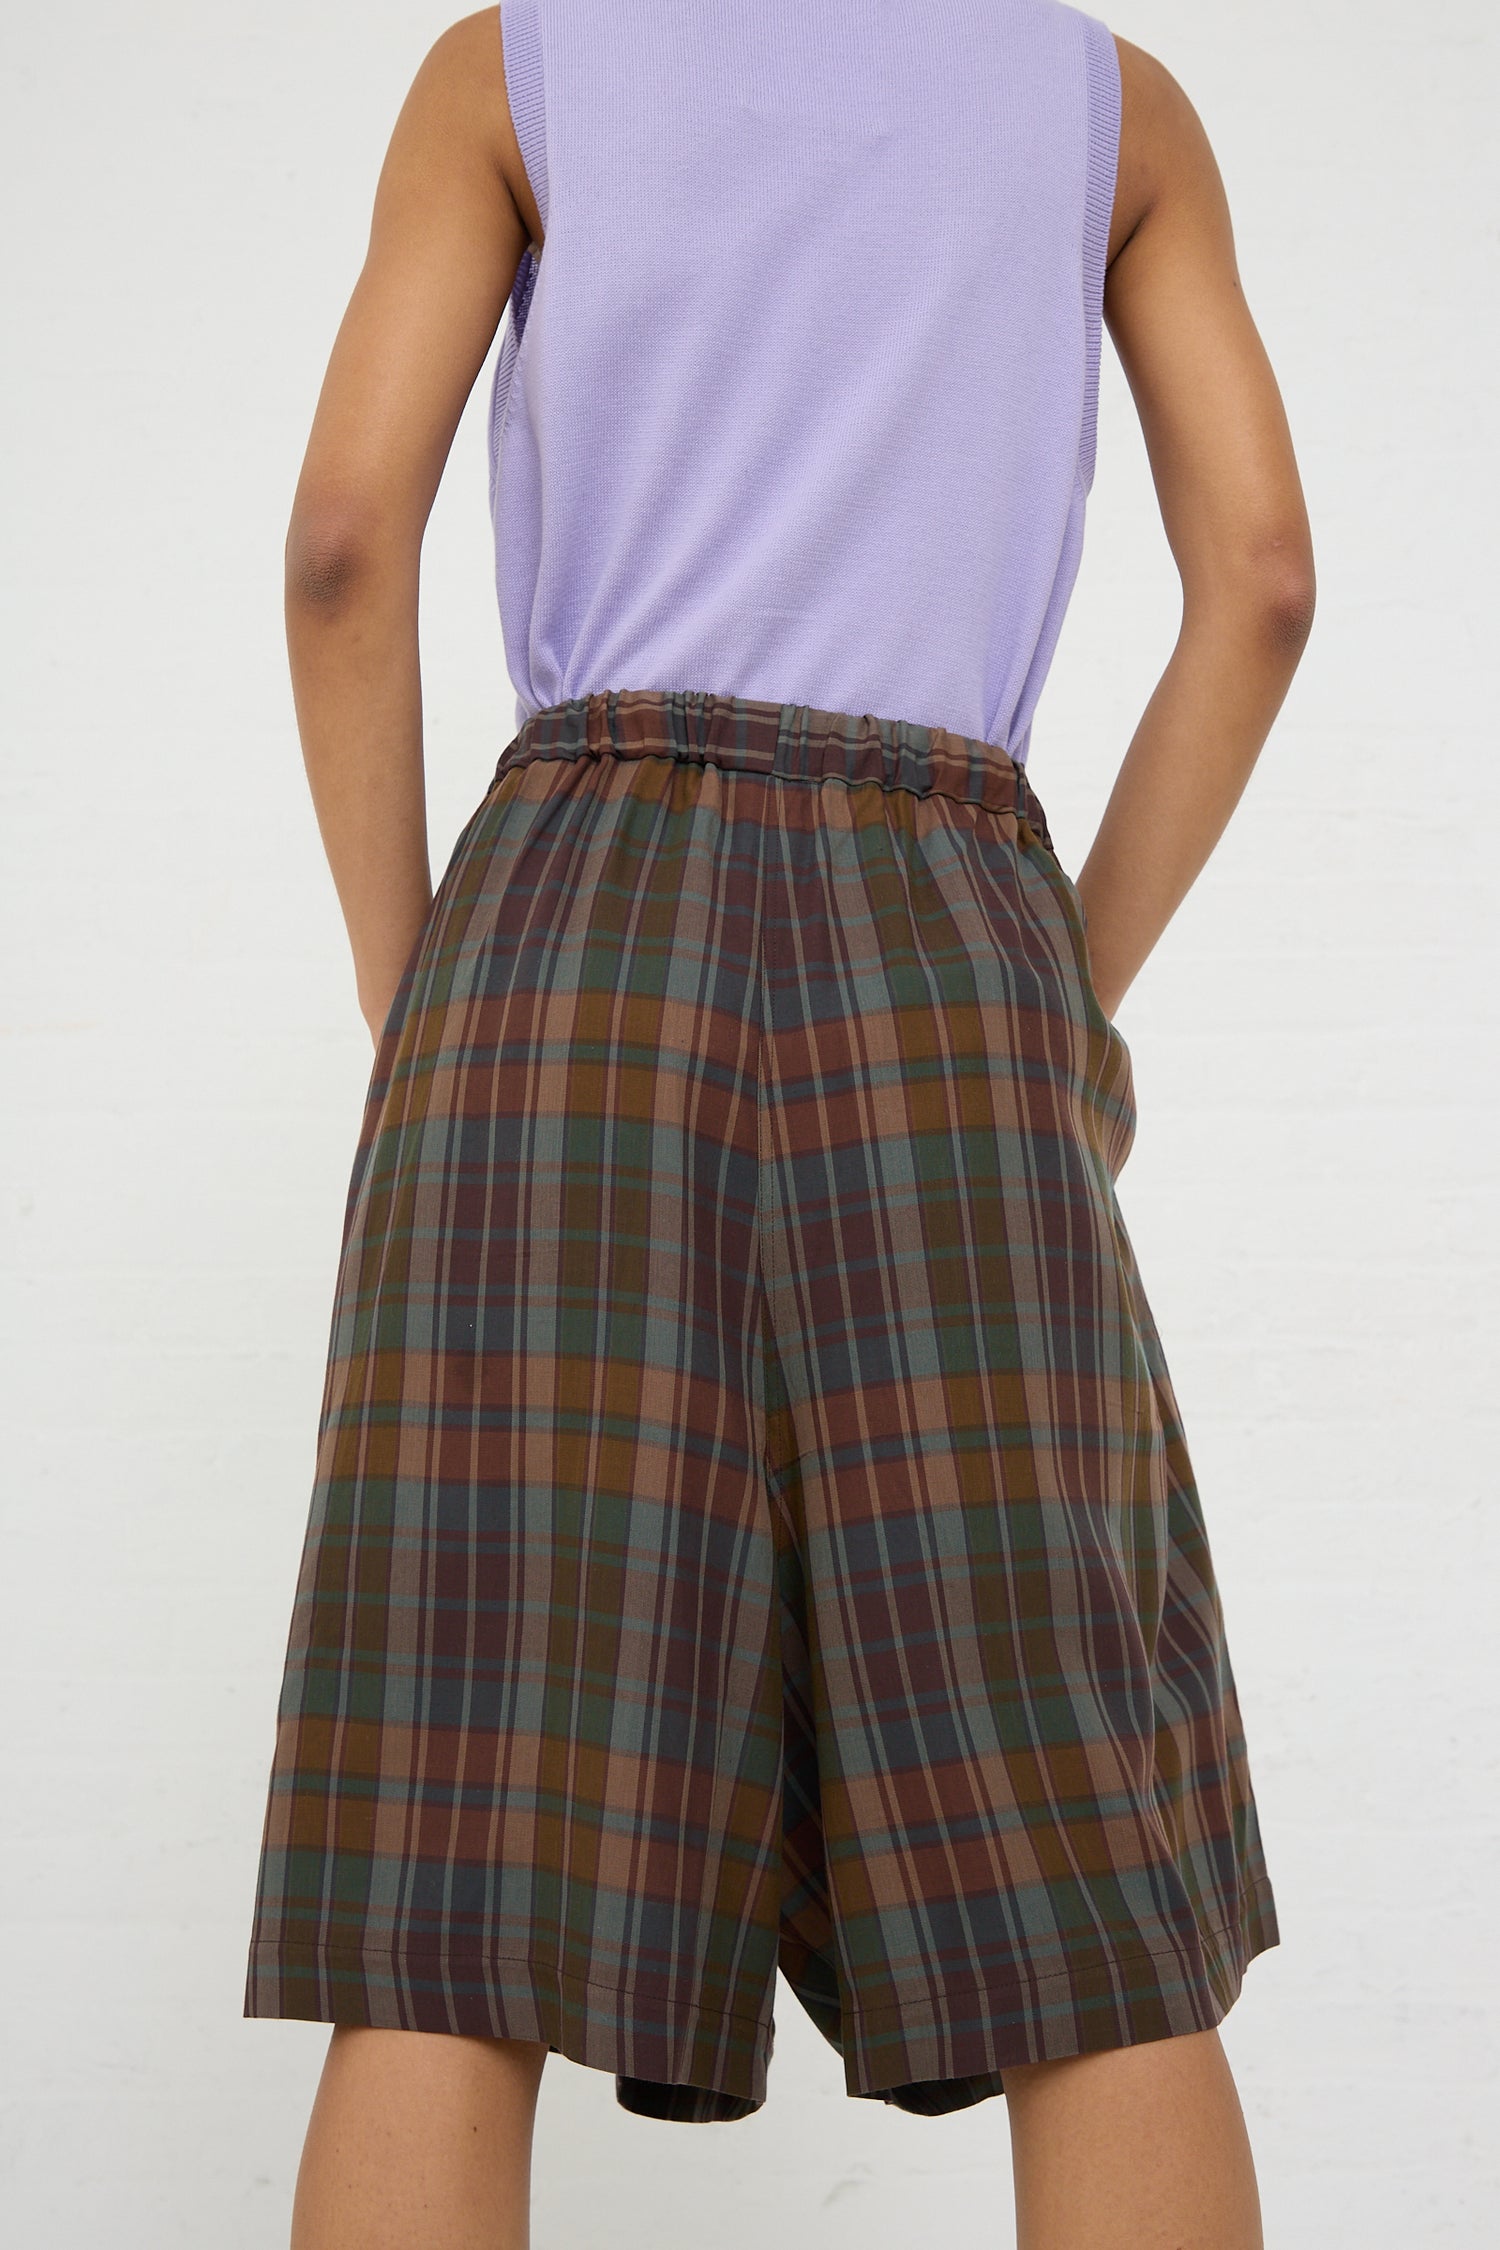 A person standing with their back towards the camera, wearing a purple sleeveless top made from ethically manufactured Tencel and Cordera's Maxi Bermuda Short in Checkered.